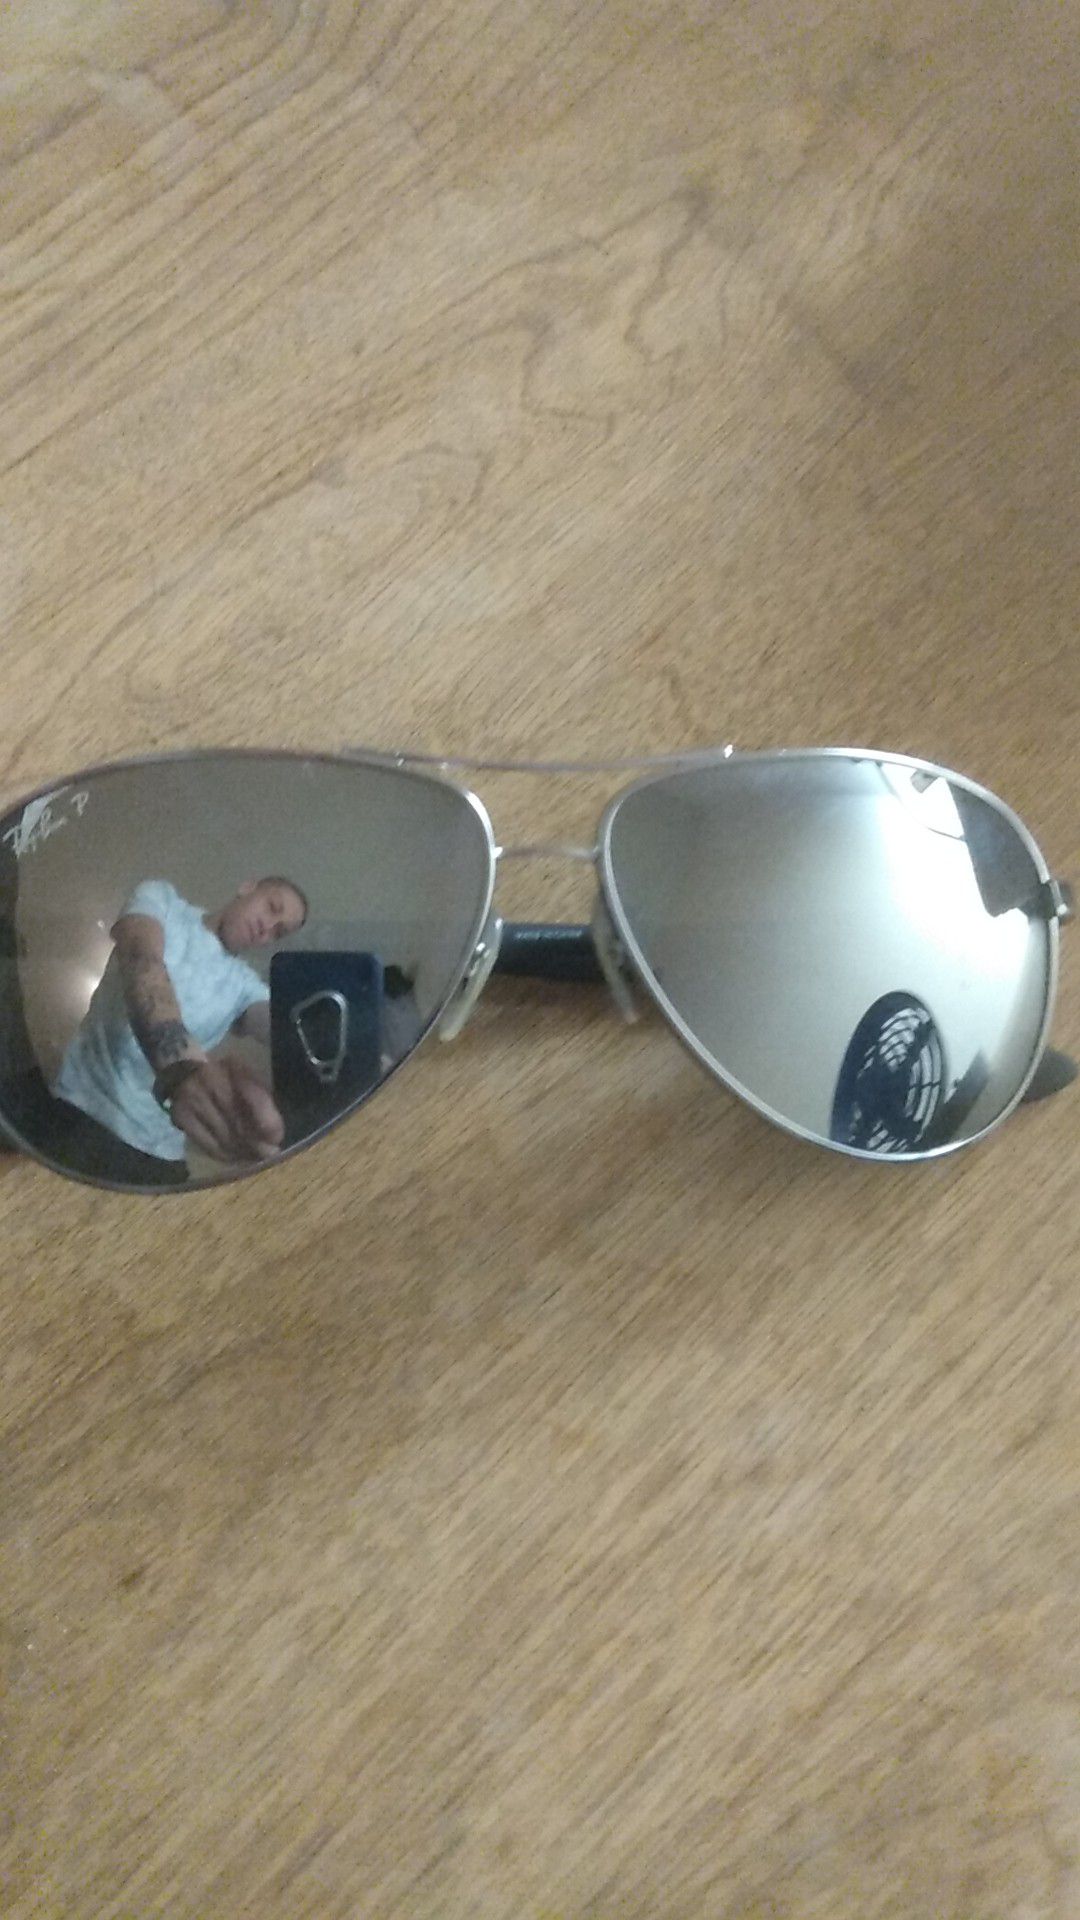 Authentic RAY BANDS for sale Aviator style $ 30